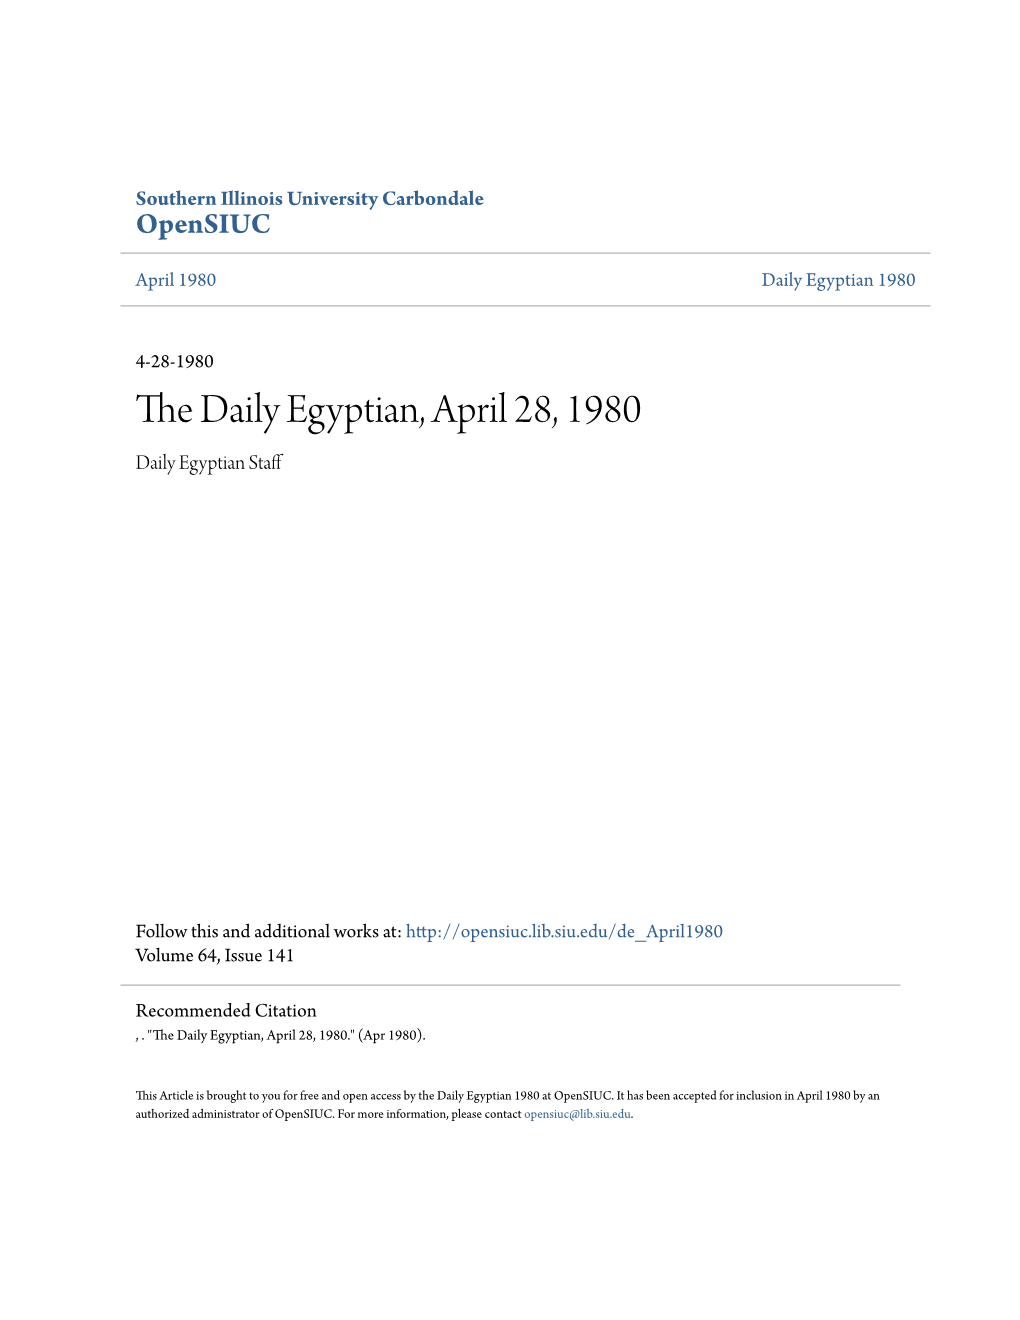 The Daily Egyptian, April 28, 1980